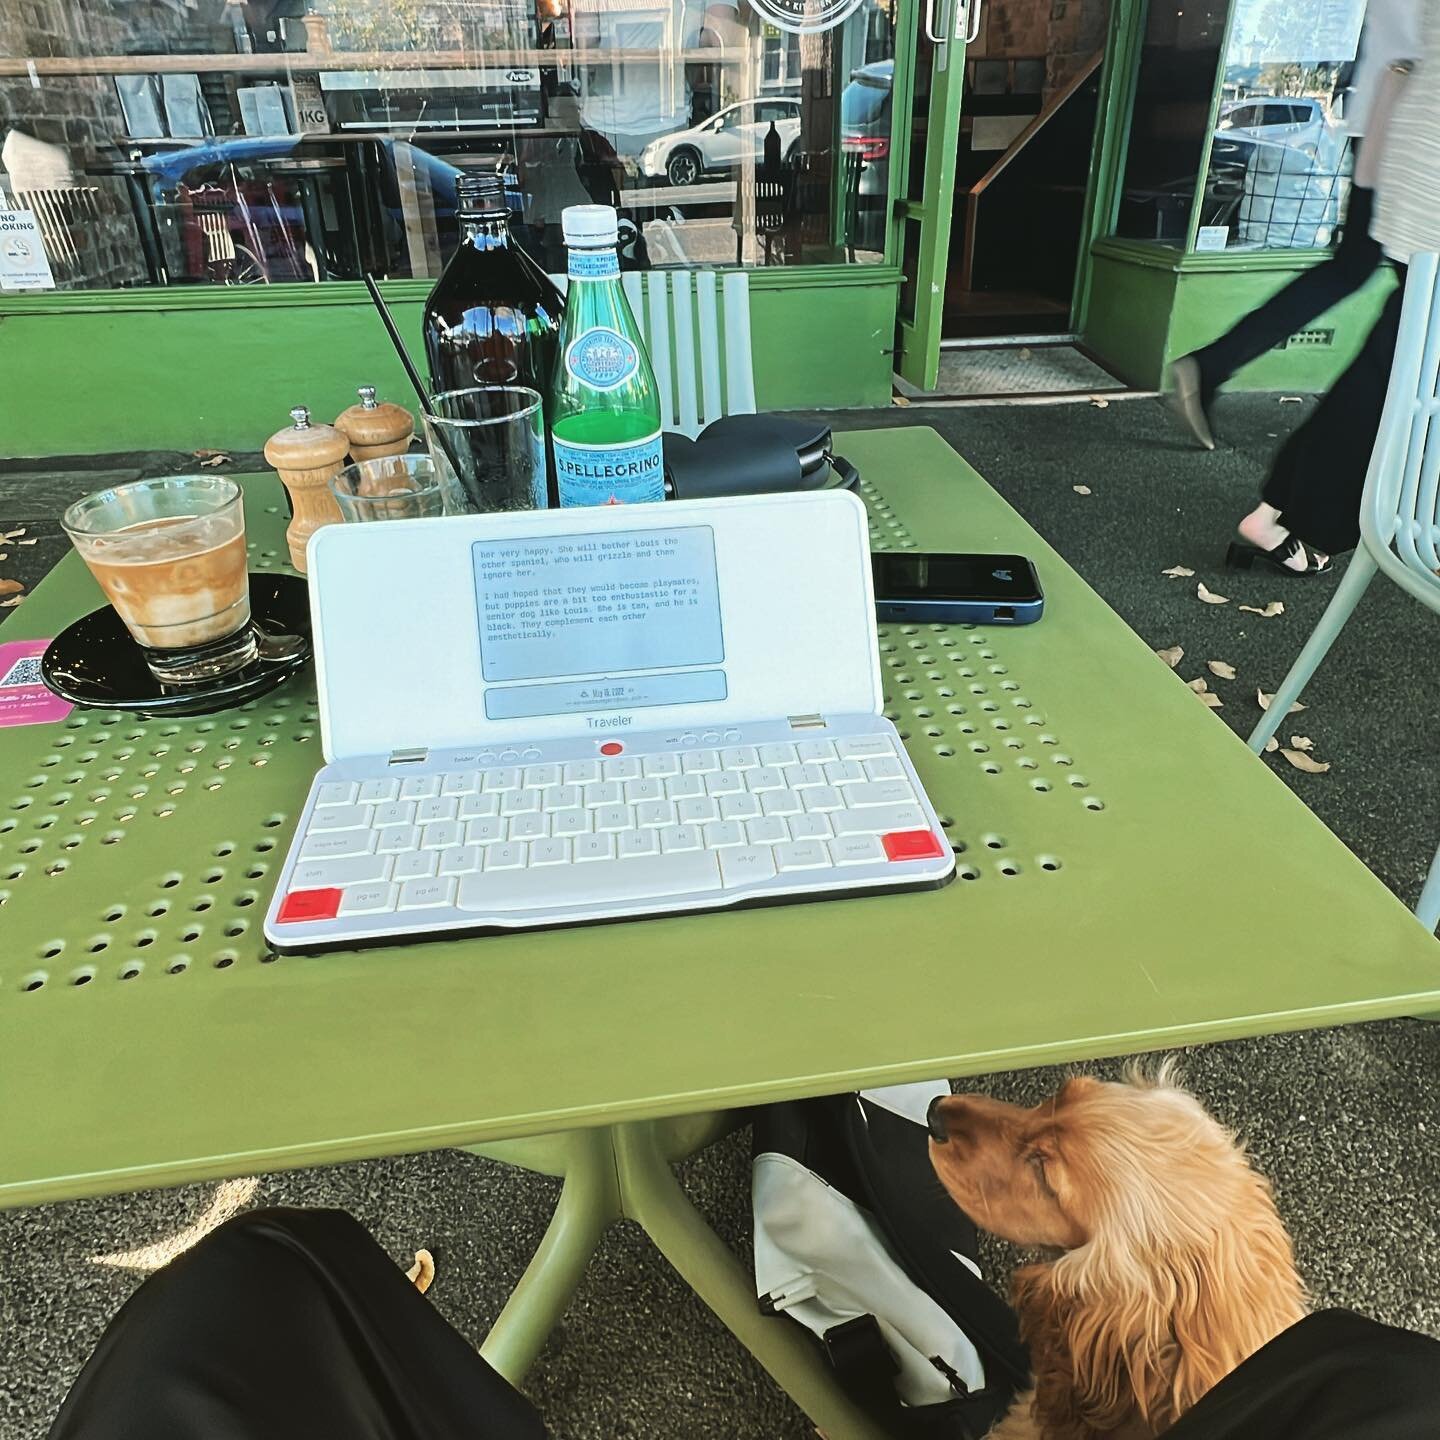 In my happy place with my furry buddy. The guilty moose cafe at Albert Park with my distraction free e-ink writing device designed by one of those clever American startups. Caffeine, dogs (in abundance) and time to write. All is well.